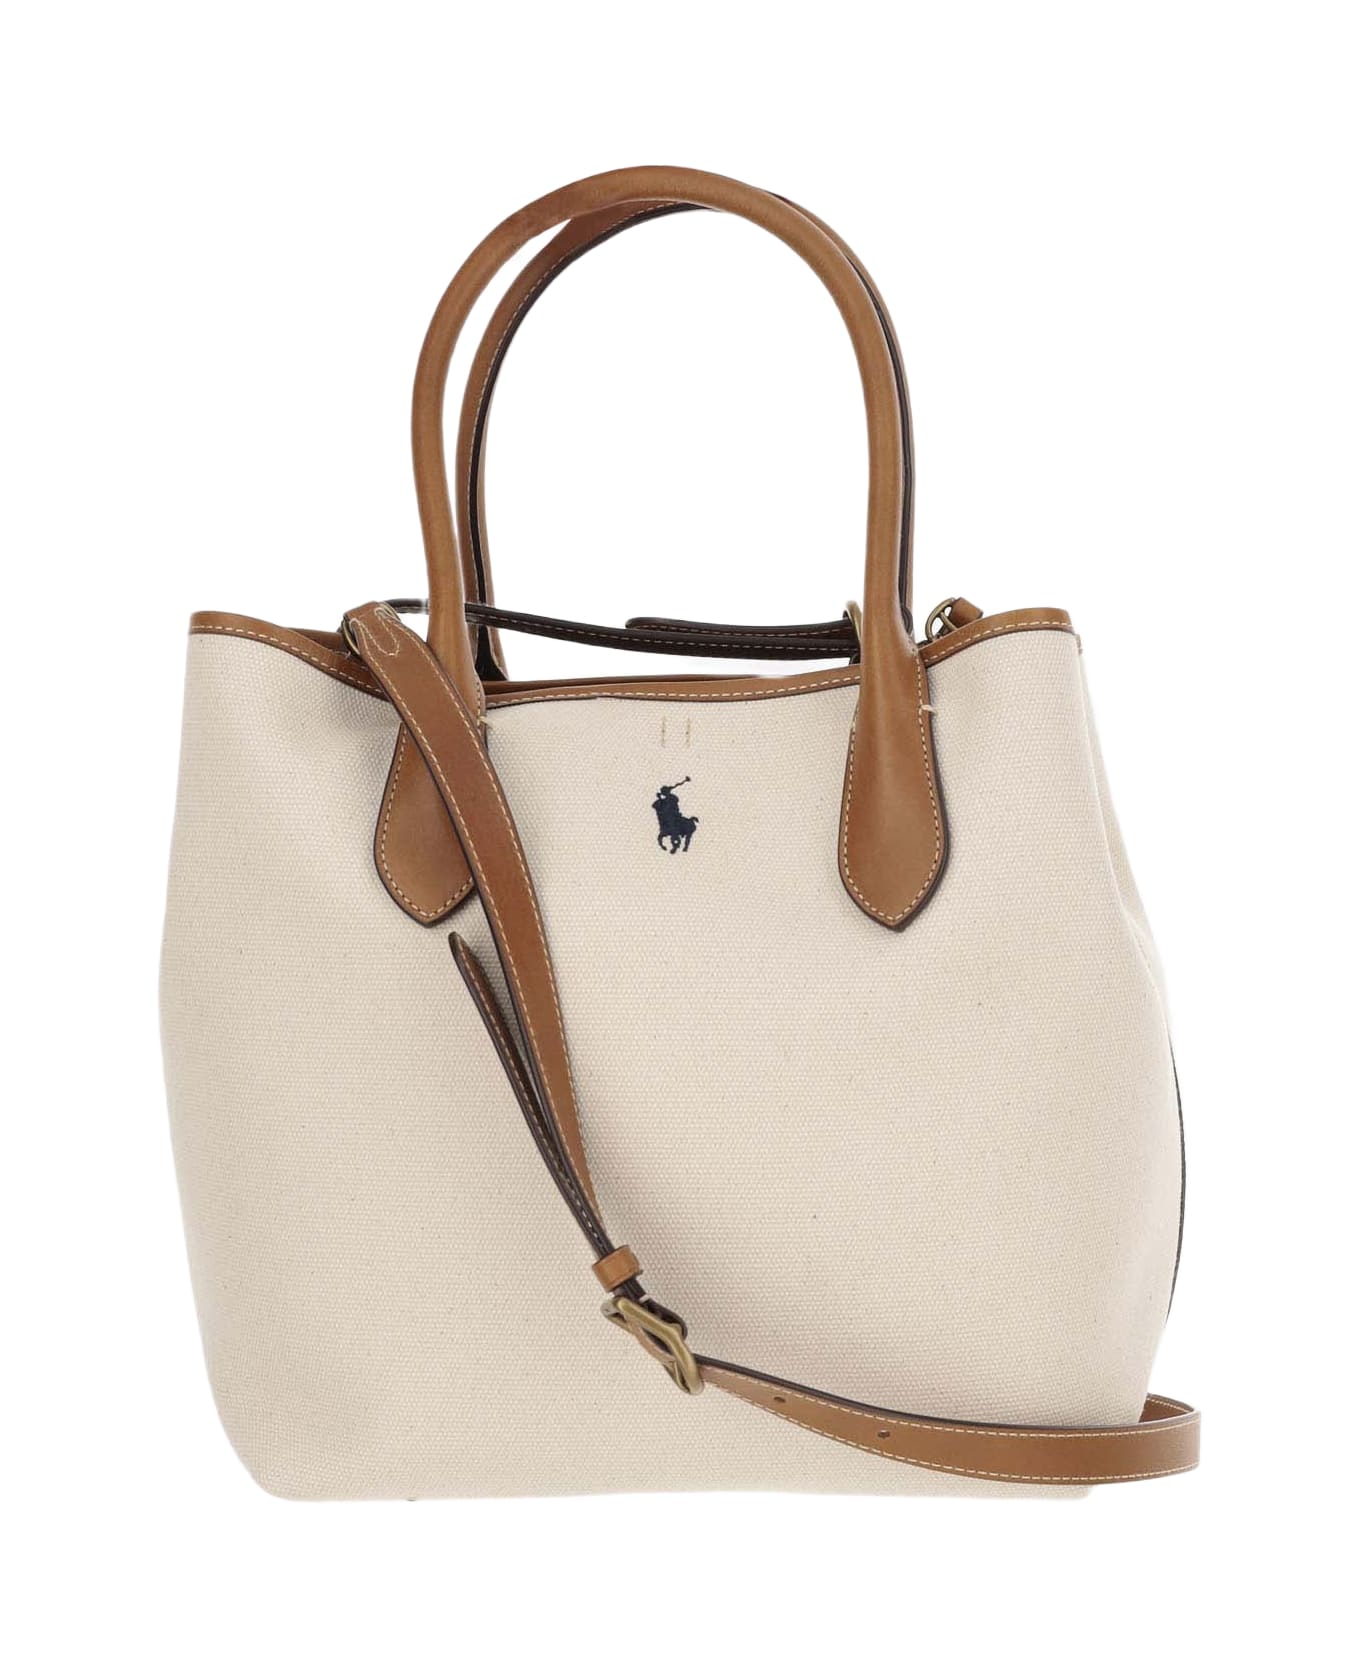 Ralph Lauren Cotton Canvas Tote Bag With Logo - Ivory